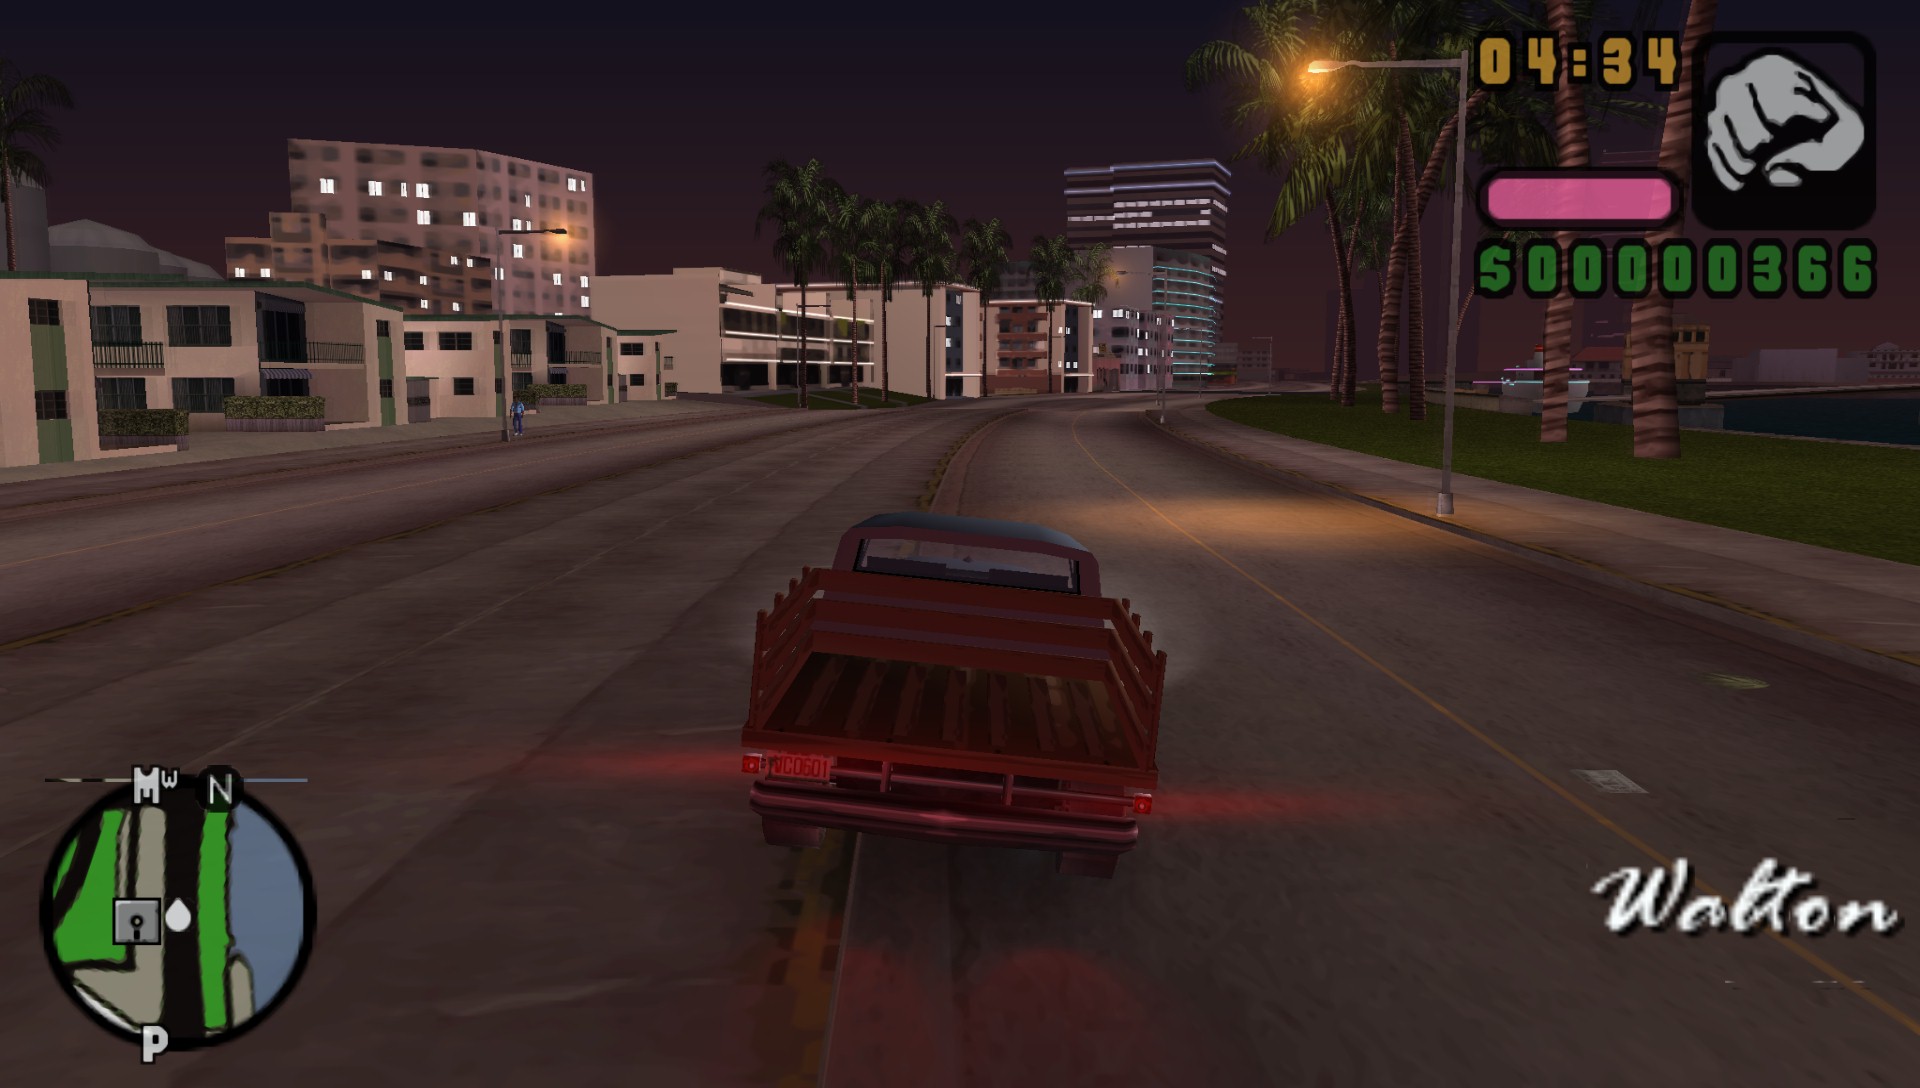 Ppsspp best settings for gta vice city stories download